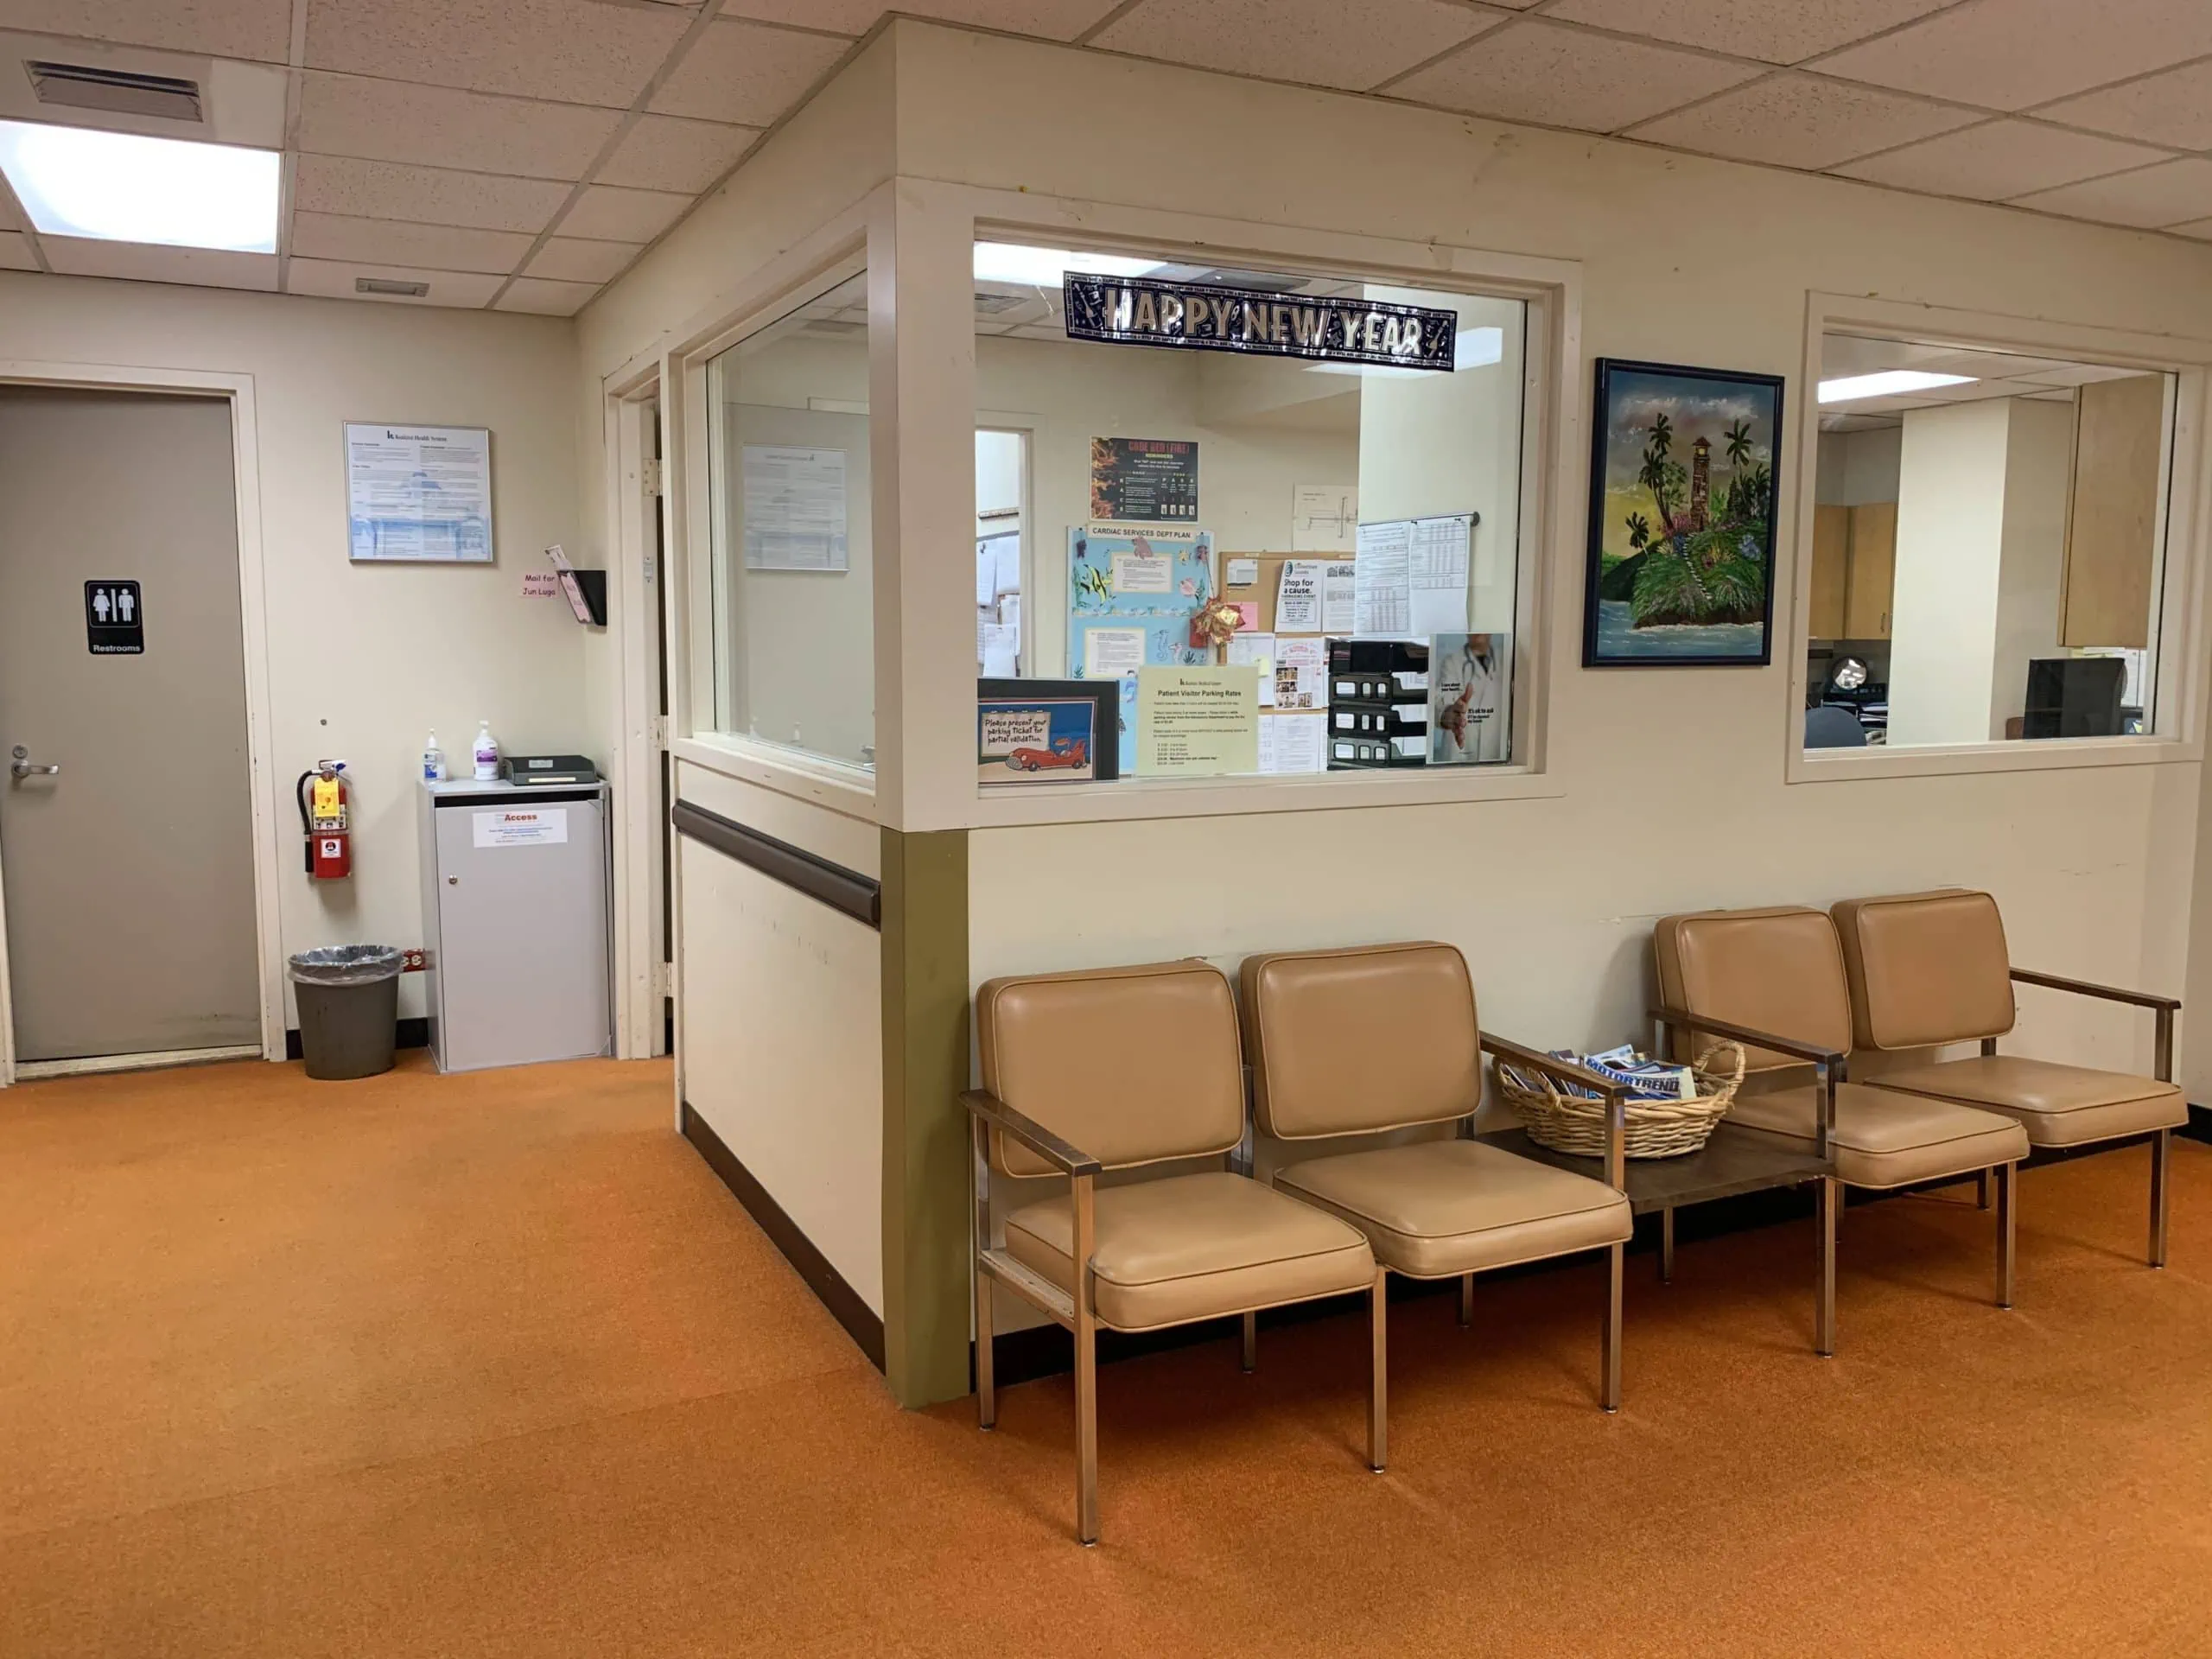 Hospital waiting room equipped with cameras